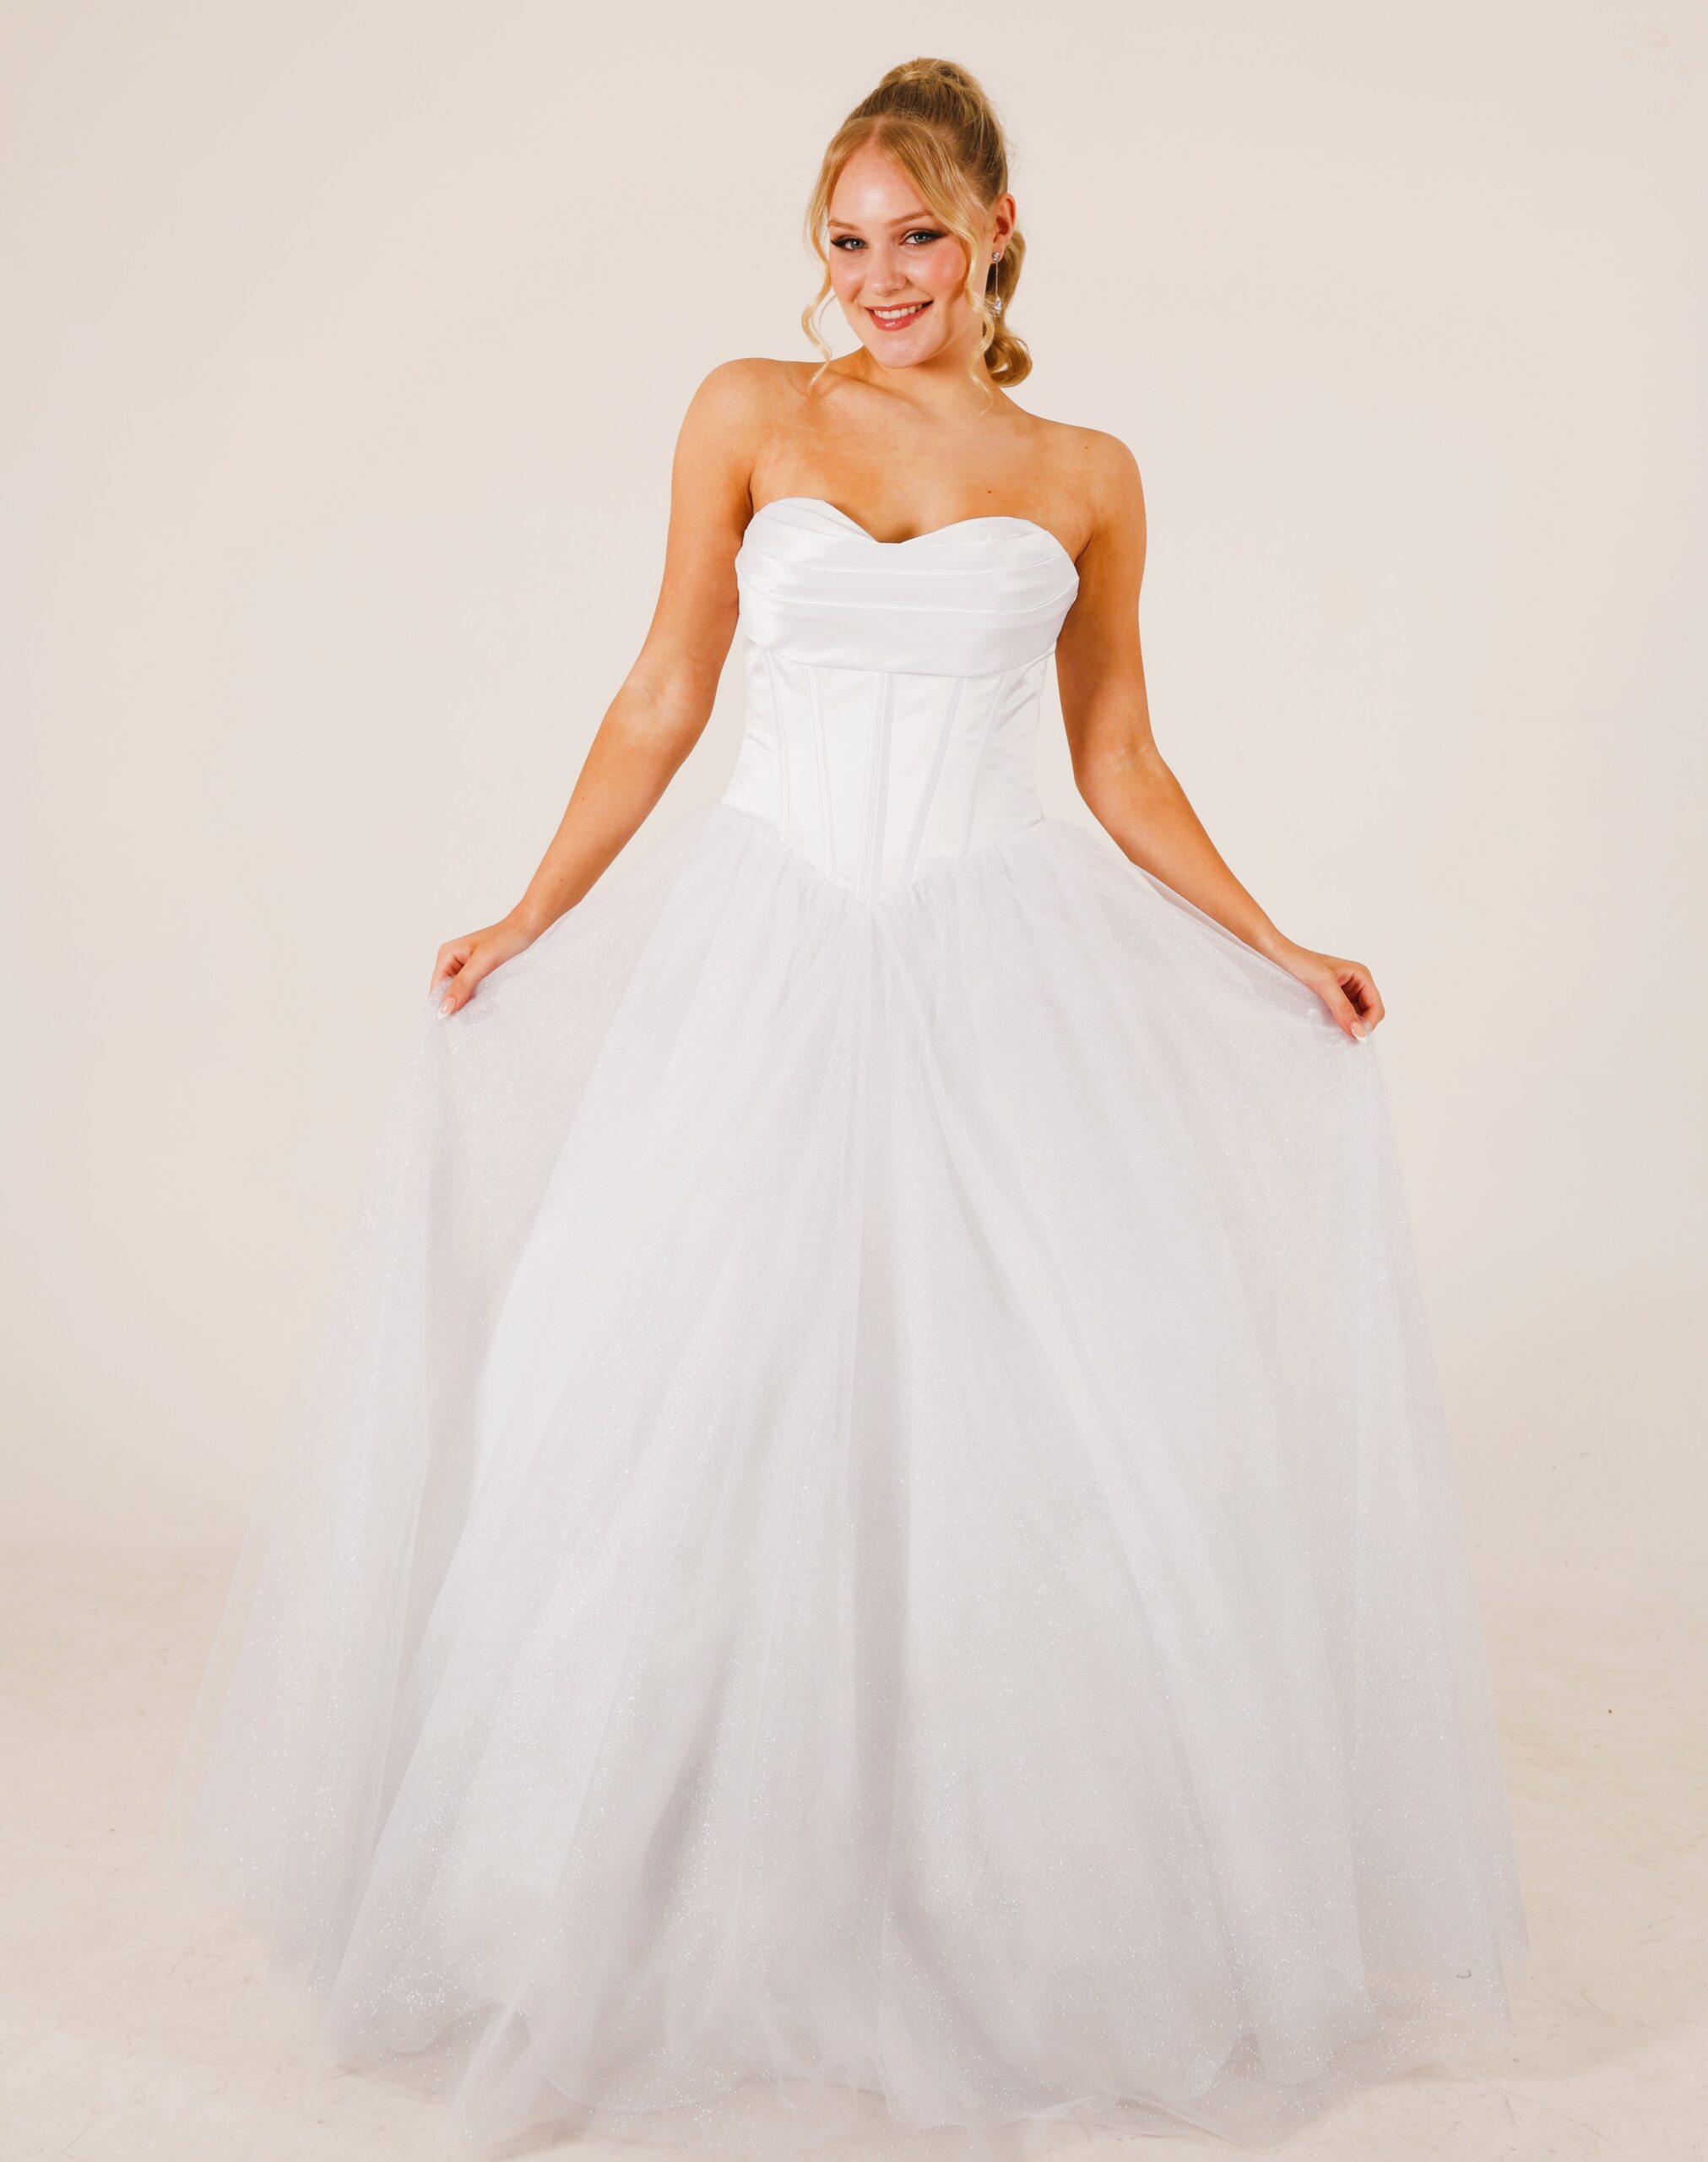 Satin bodice with cowl neck - v shaped bodice and tulle glitter skirt